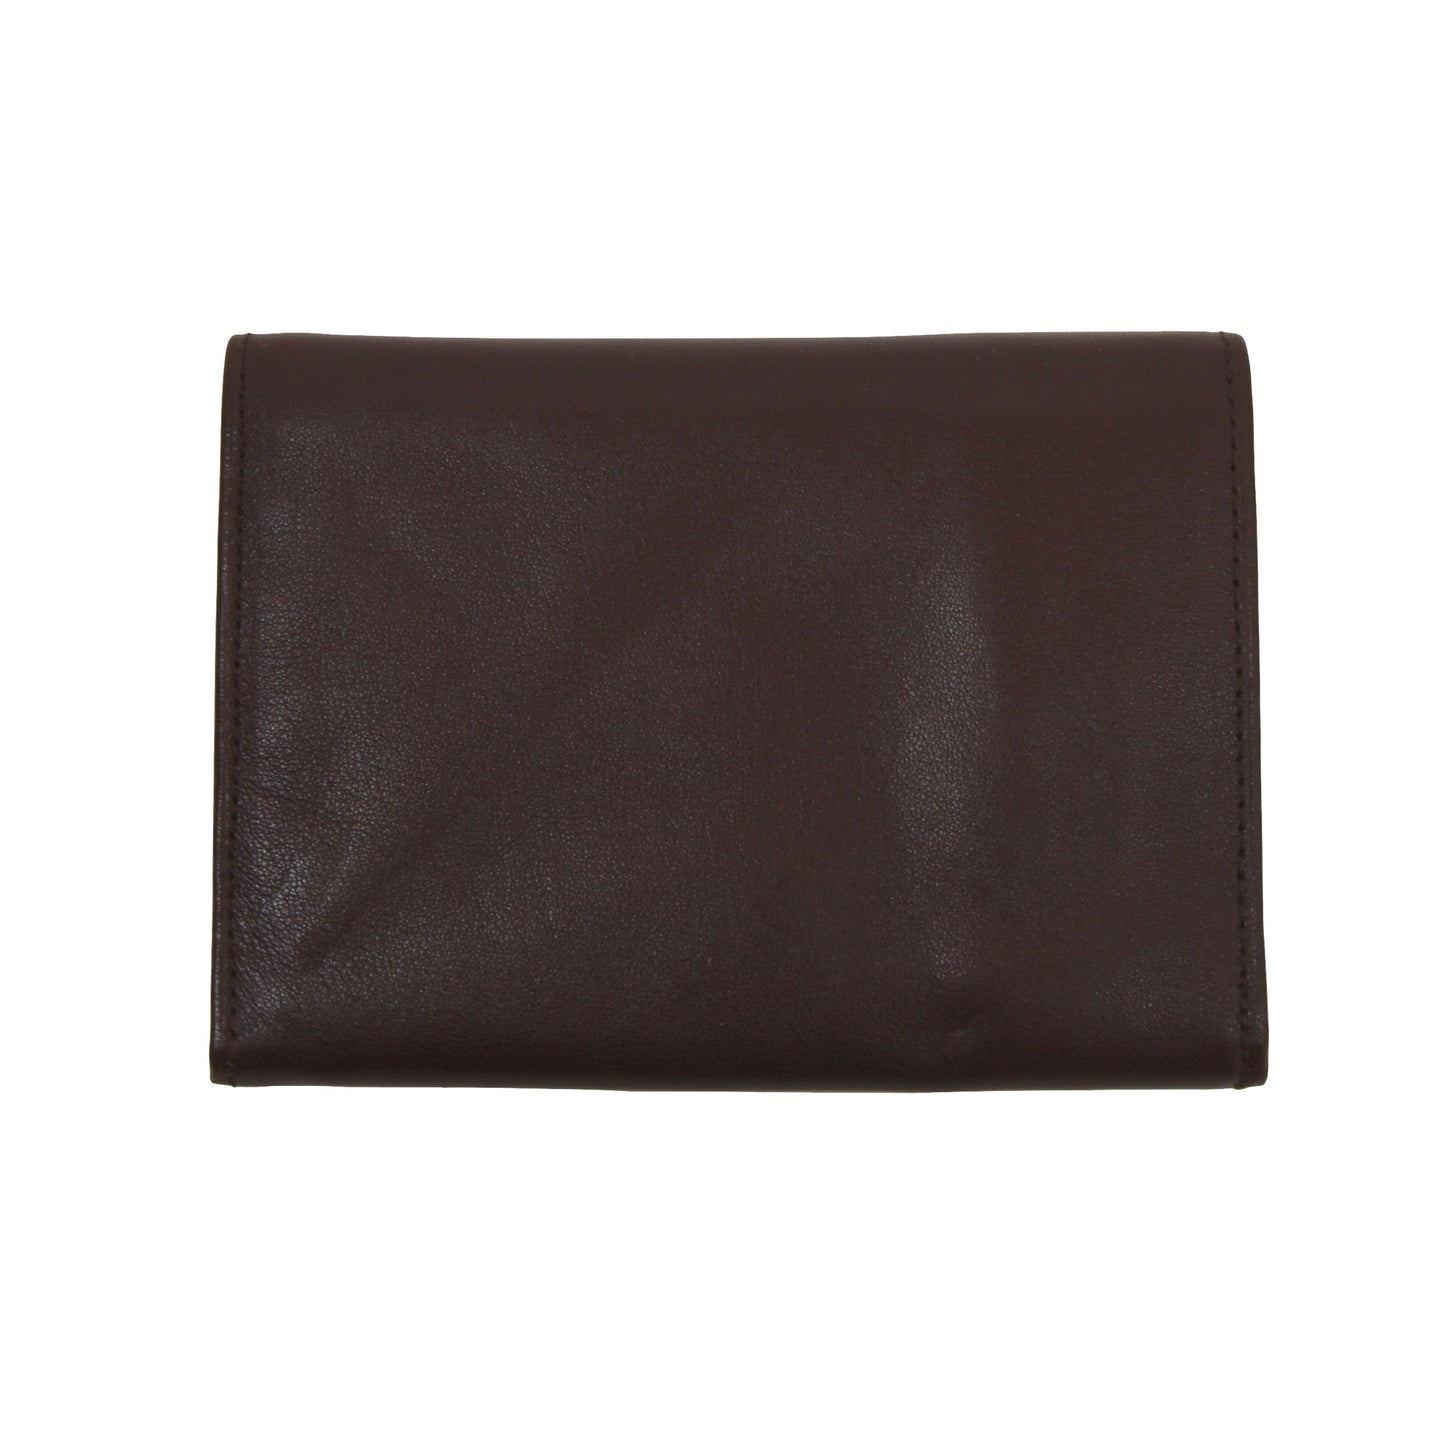 Luxury Leather Wallet With Coin Pouch - Brown